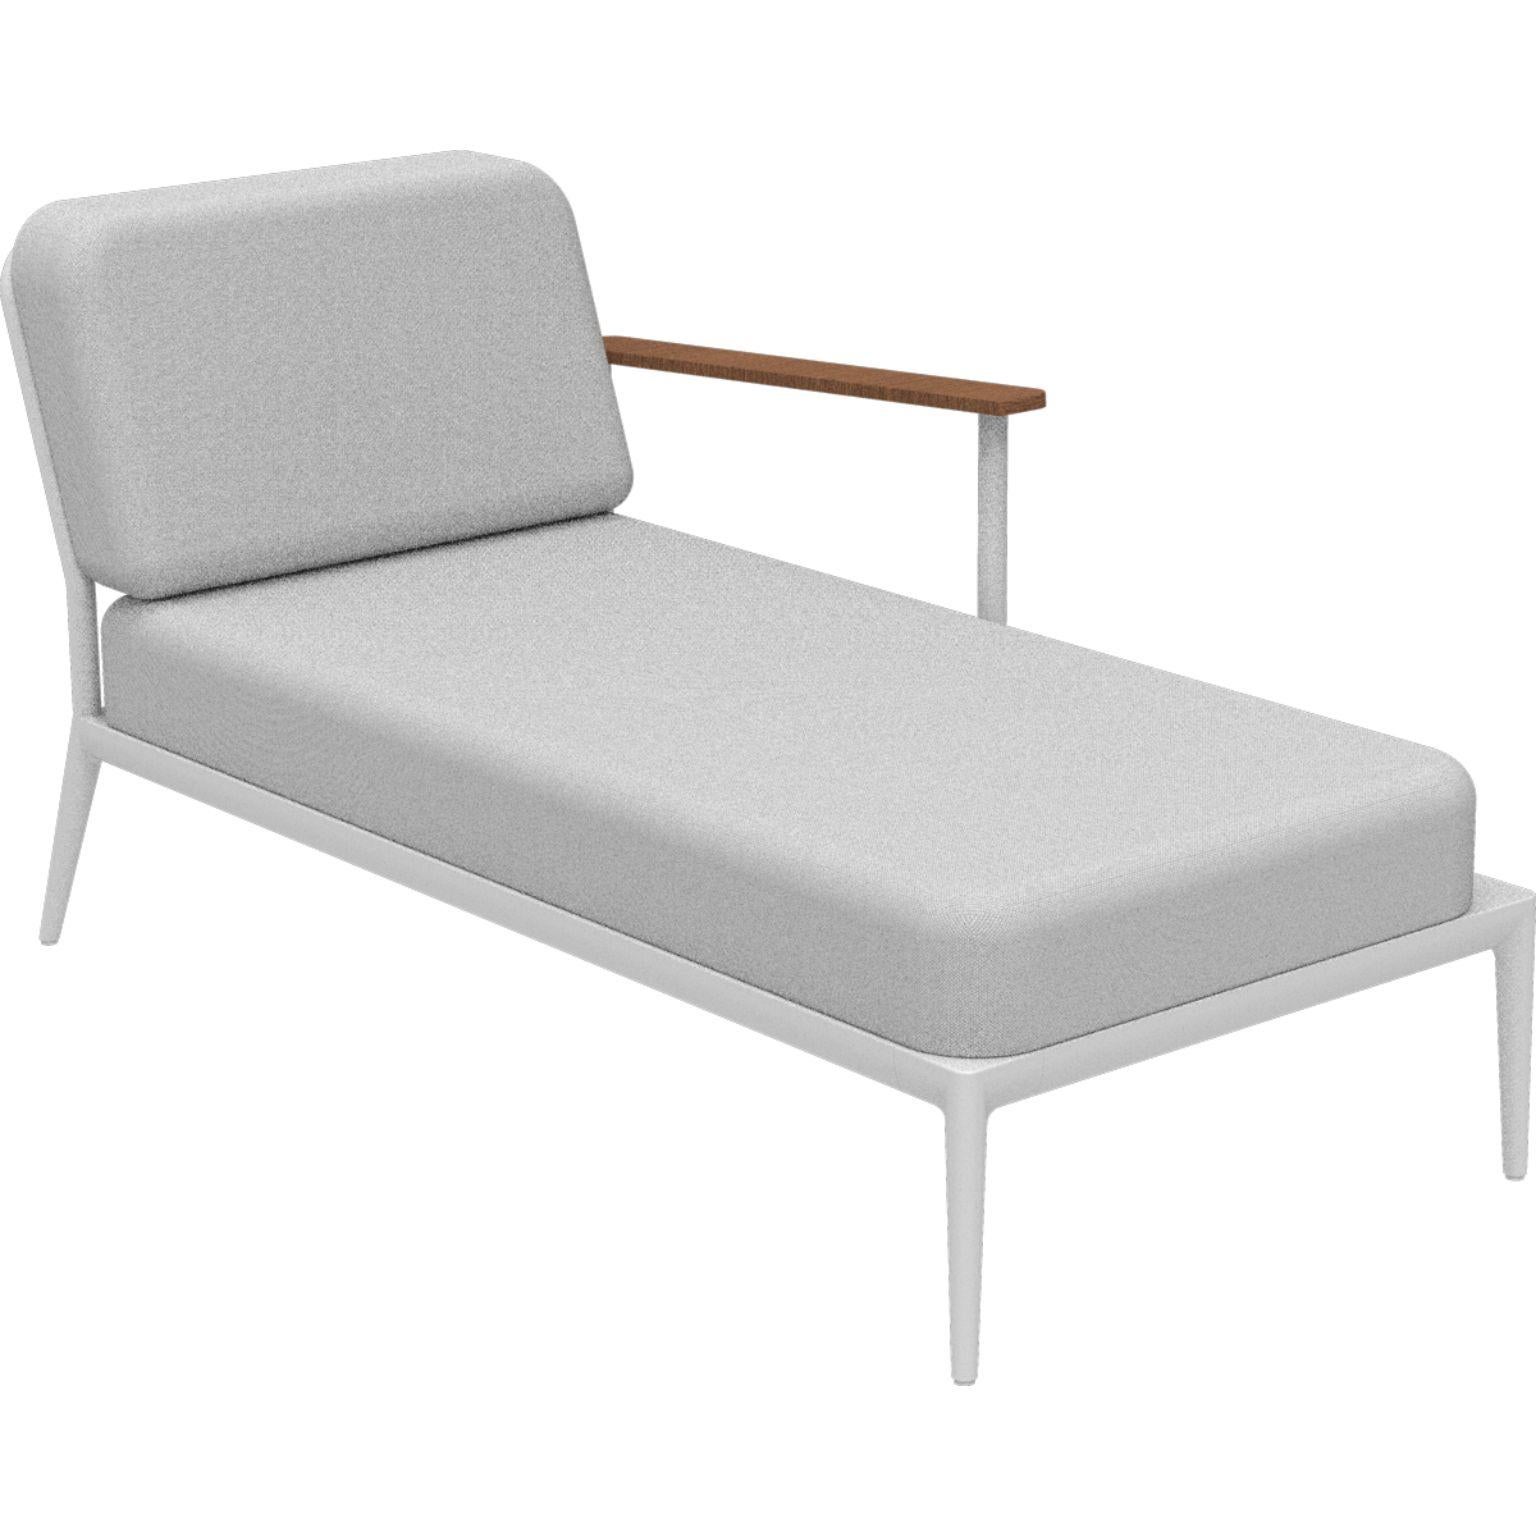 Nature White Left Chaise longue by MOWEE
Dimensions: D155 x W76 x H81 cm (seat height 42 cm).
Material: Aluminum, upholstery and Iroko Wood.
Weight: 28 kg.
Also available in different colors and finishes. 

An unmistakable collection for its